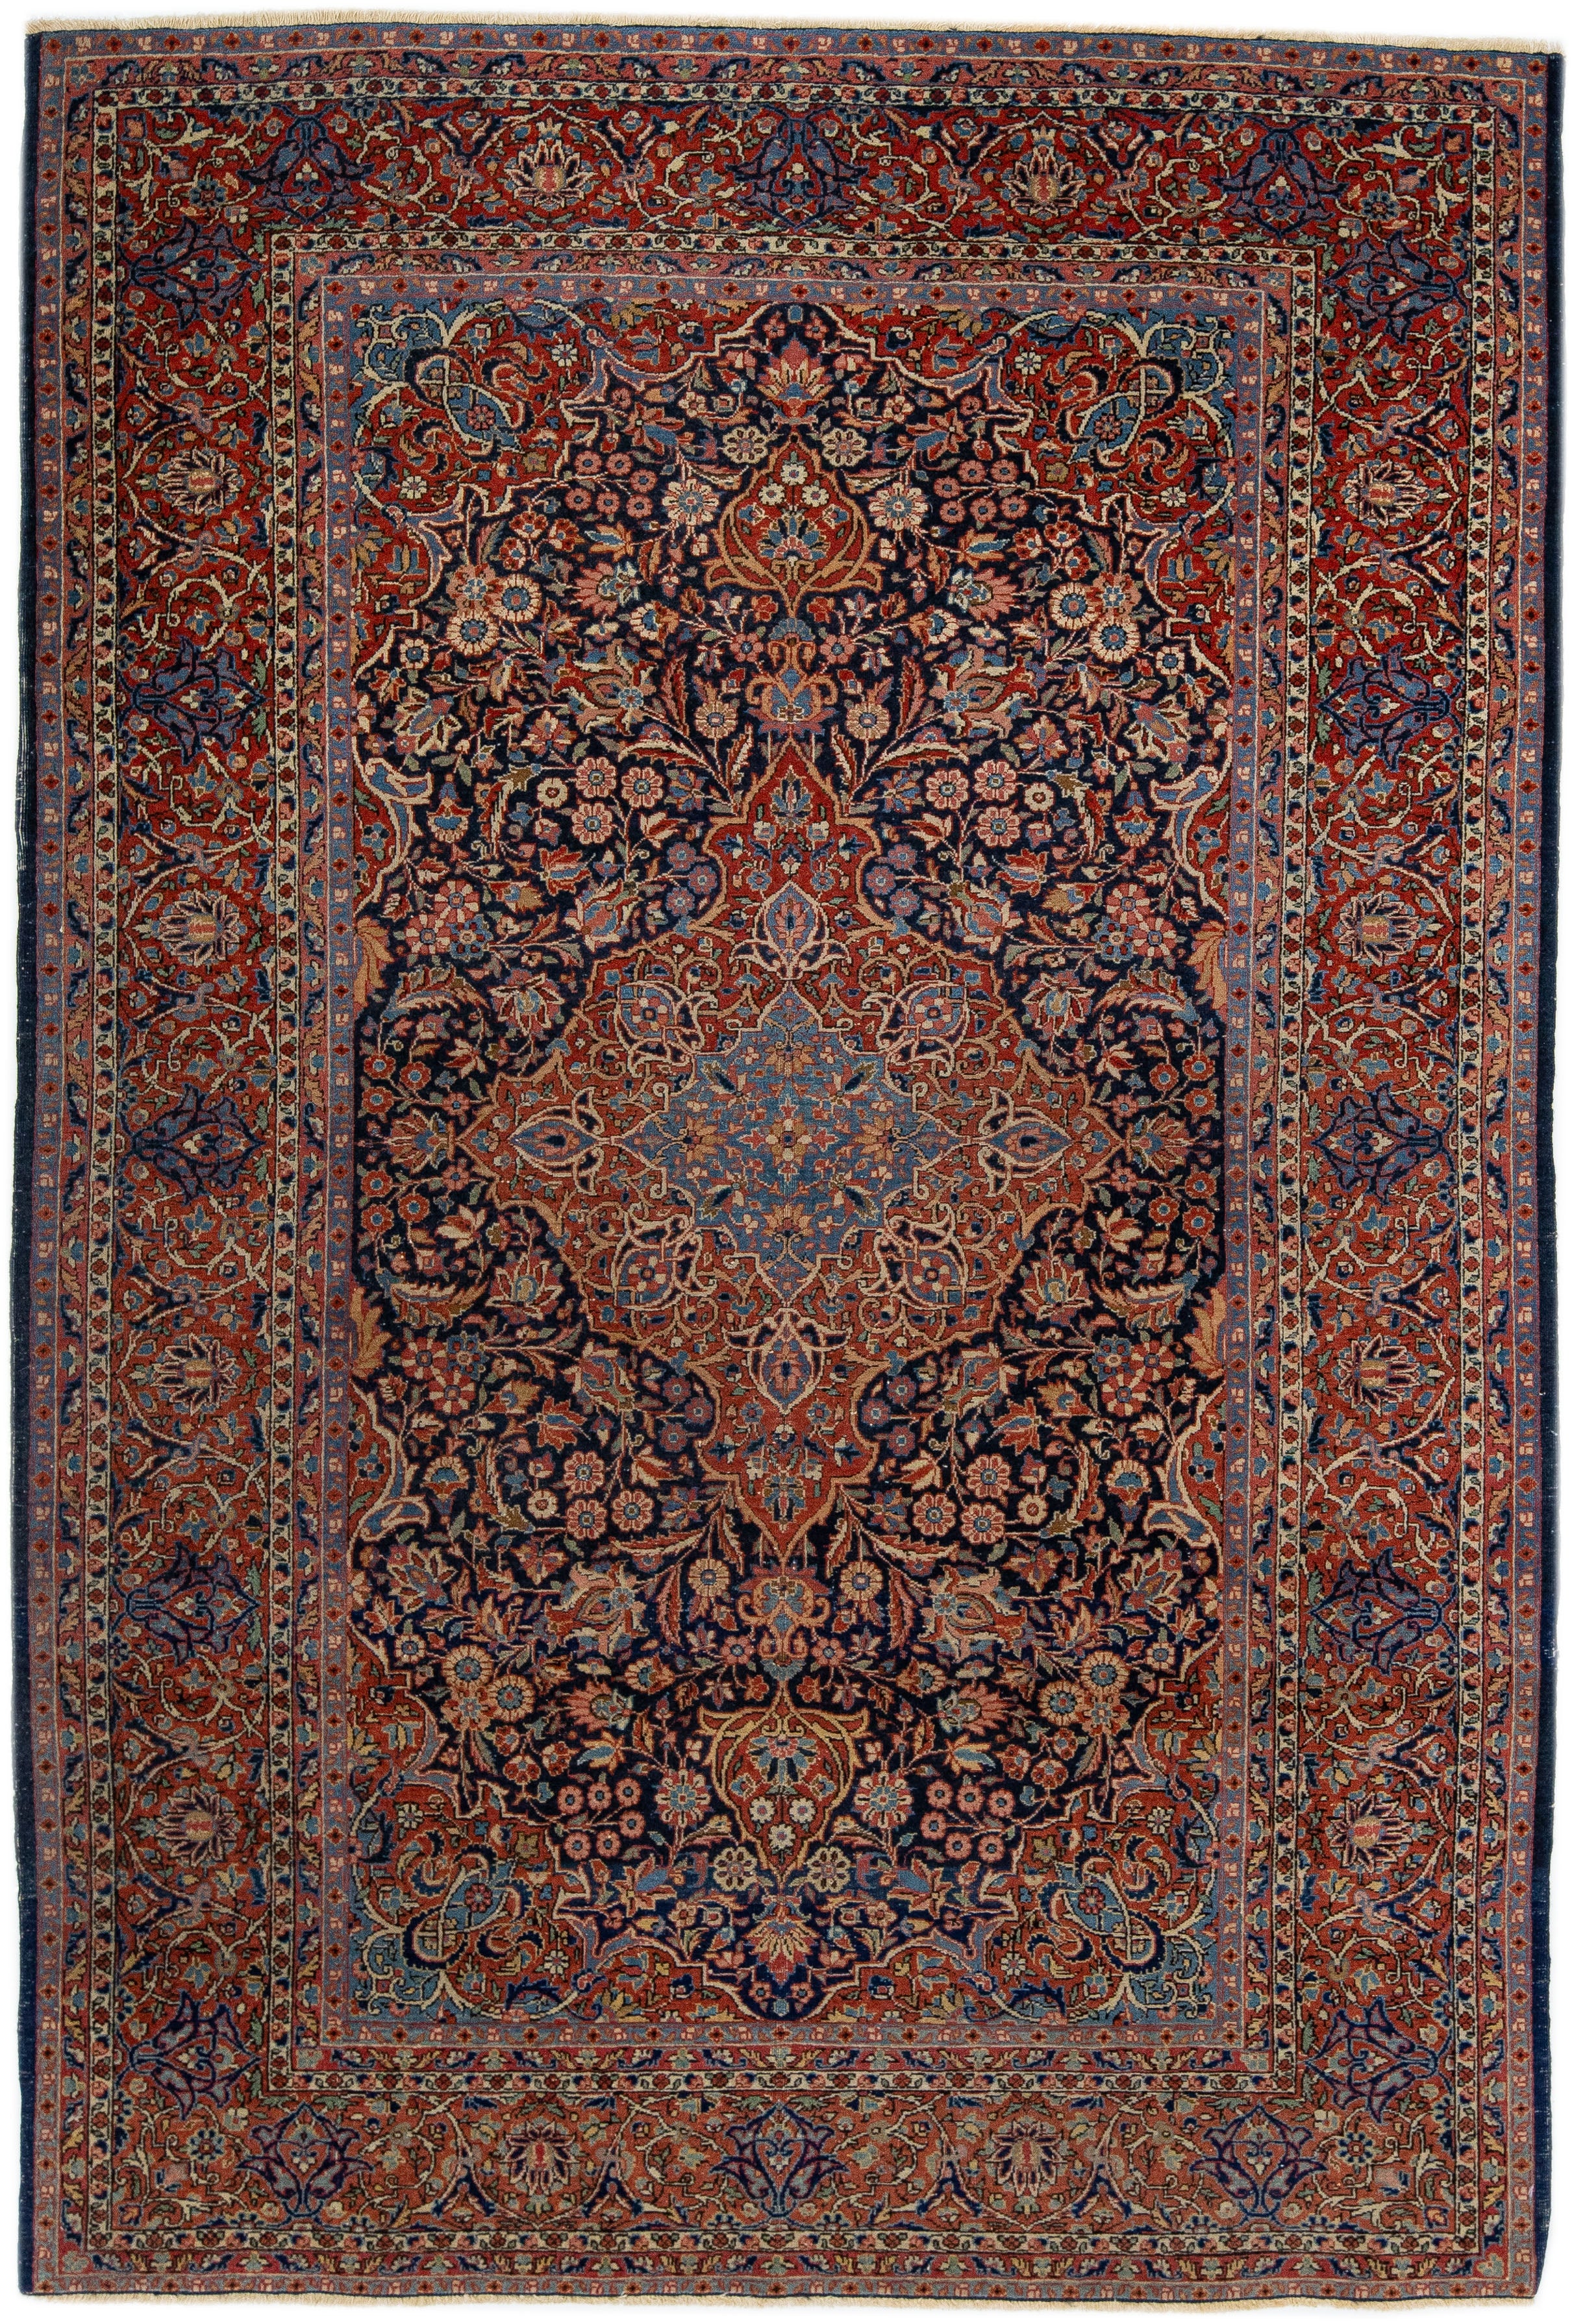 Antique Persian Kashan Handmade Medallion Blue and Red Scatter Wool Rug